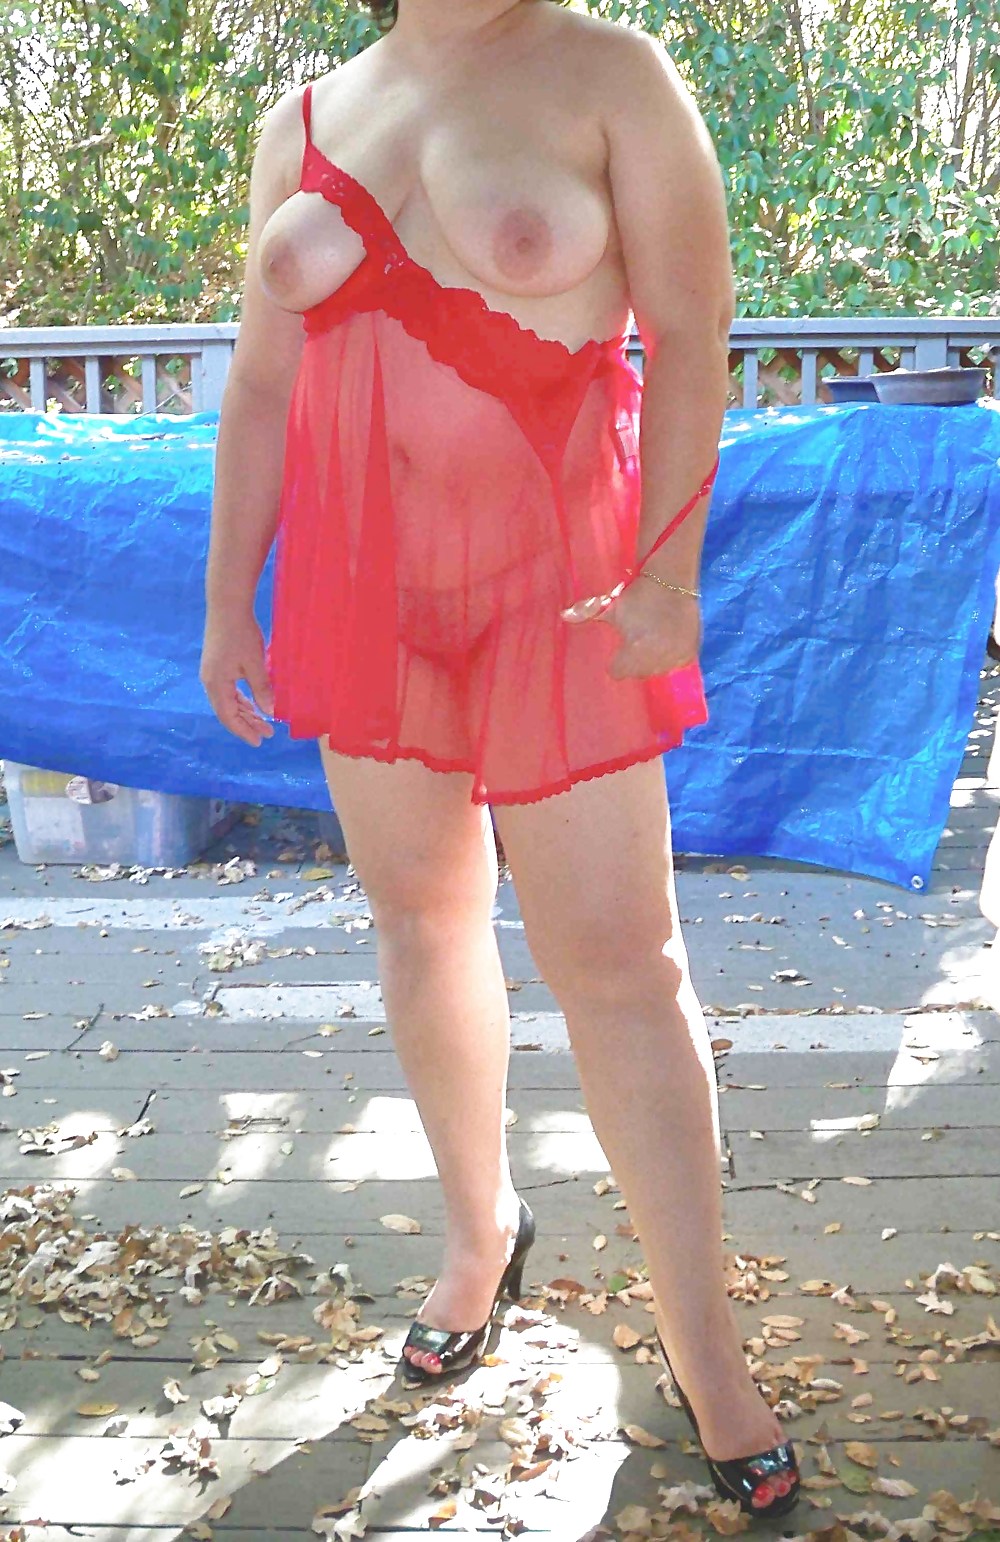 Her red teddy outdoors, bbw plump tits and pussy porn gallery